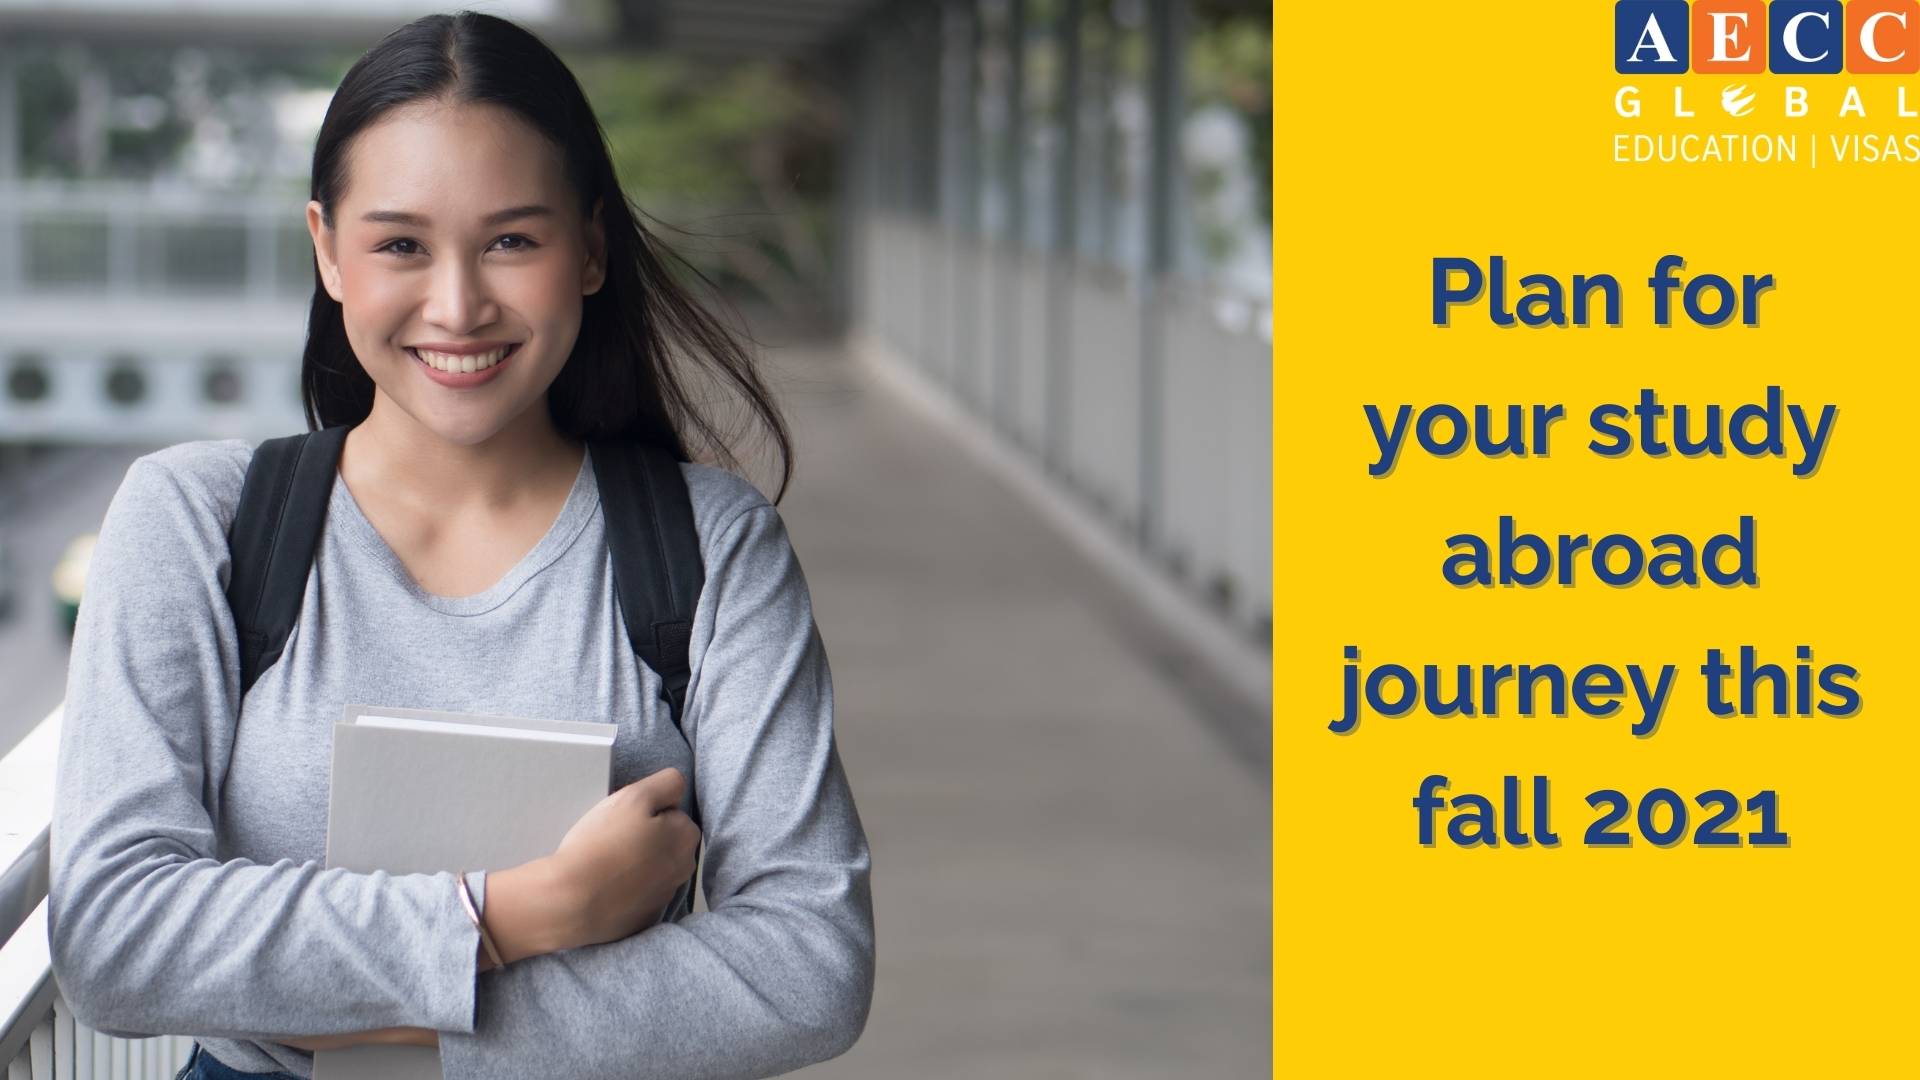 Plan-for-your-study-abroad-journey-this-fall-2021